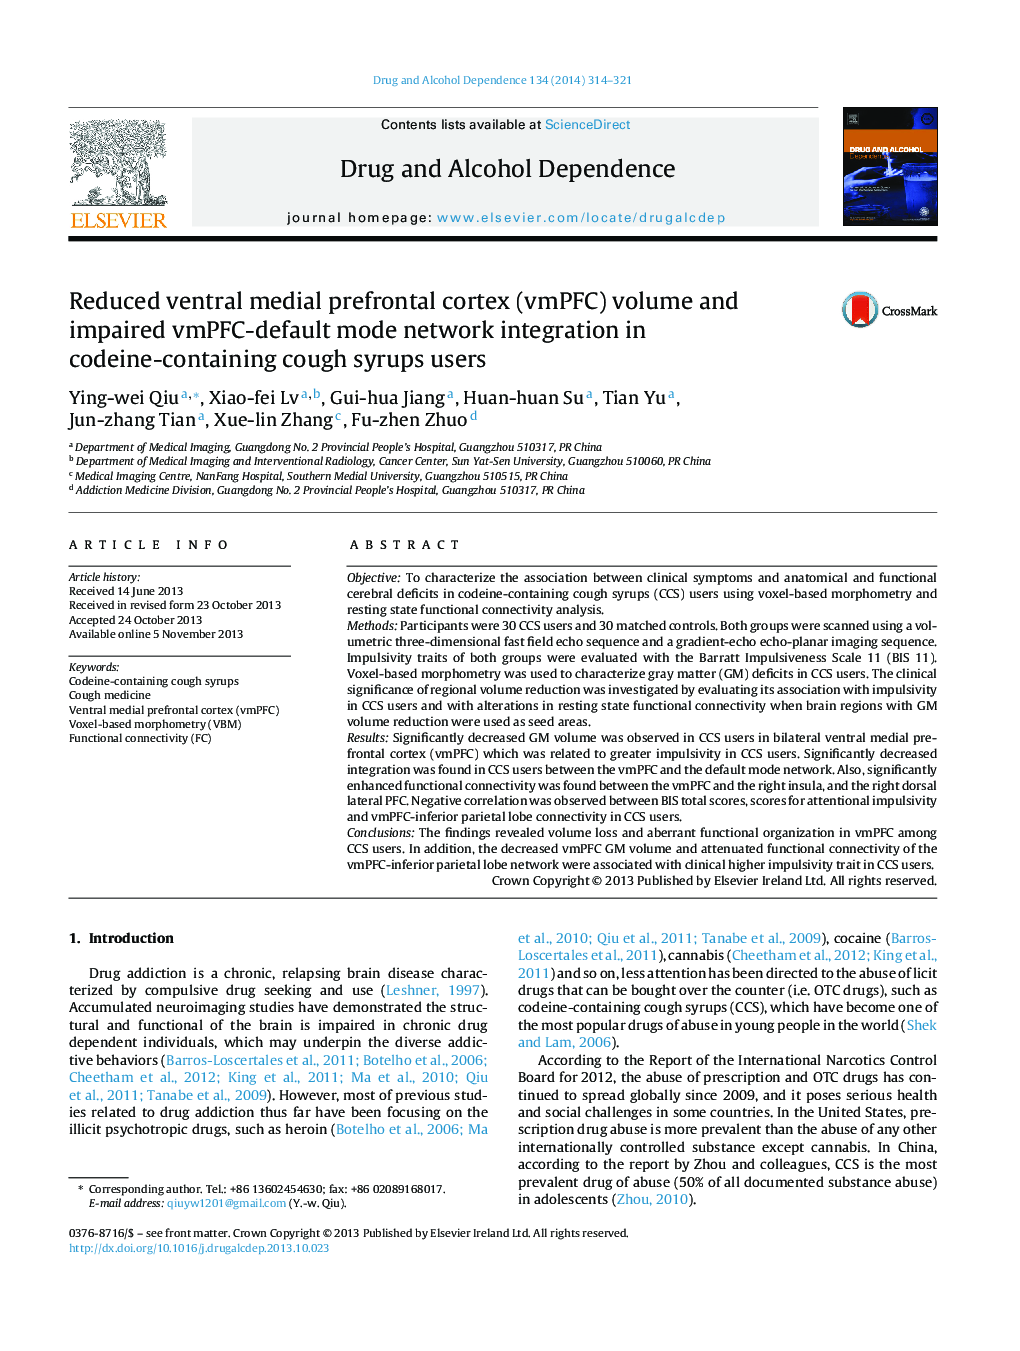 Reduced ventral medial prefrontal cortex (vmPFC) volume and impaired vmPFC-default mode network integration in codeine-containing cough syrups users